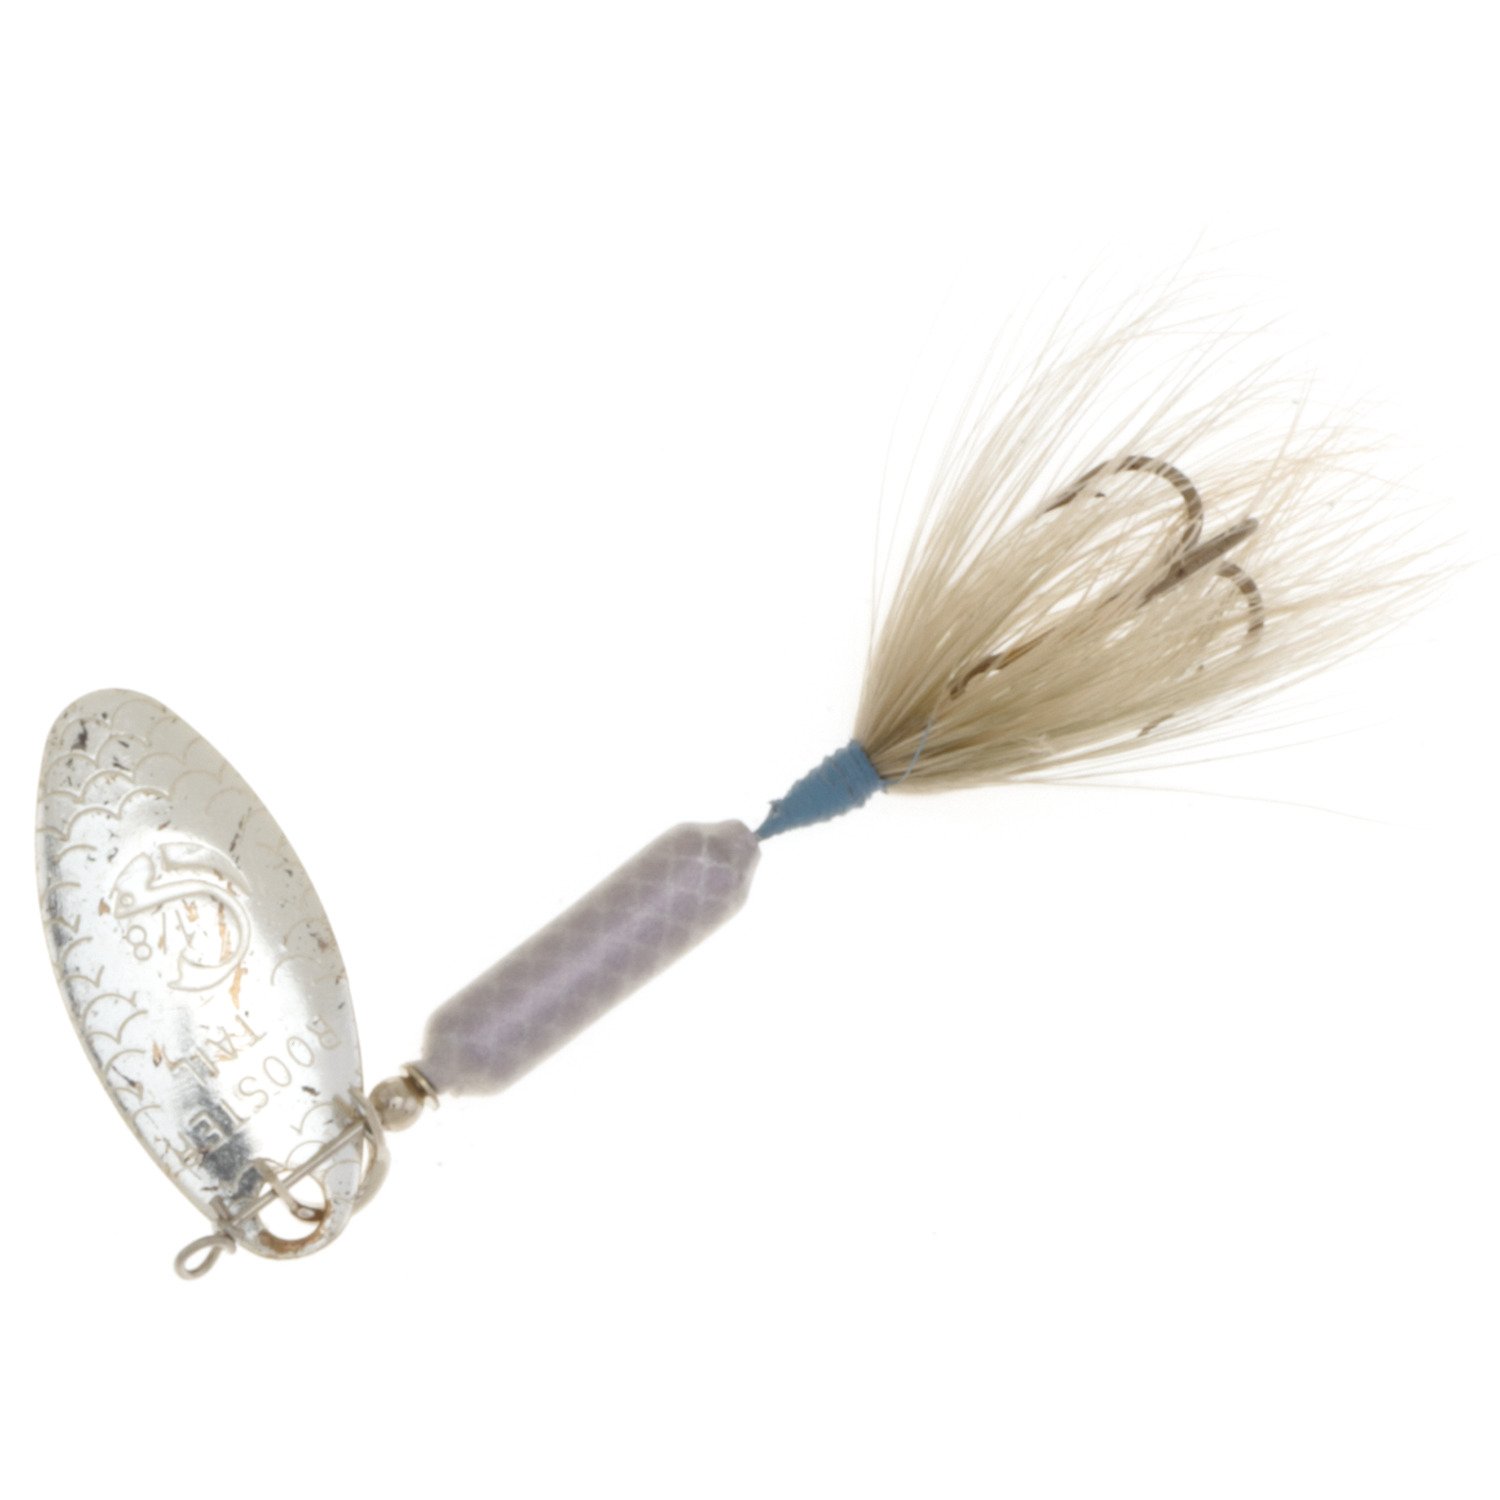  Wordens 208-FRB Rooster Tail in-Line Spinner, 2 1/4